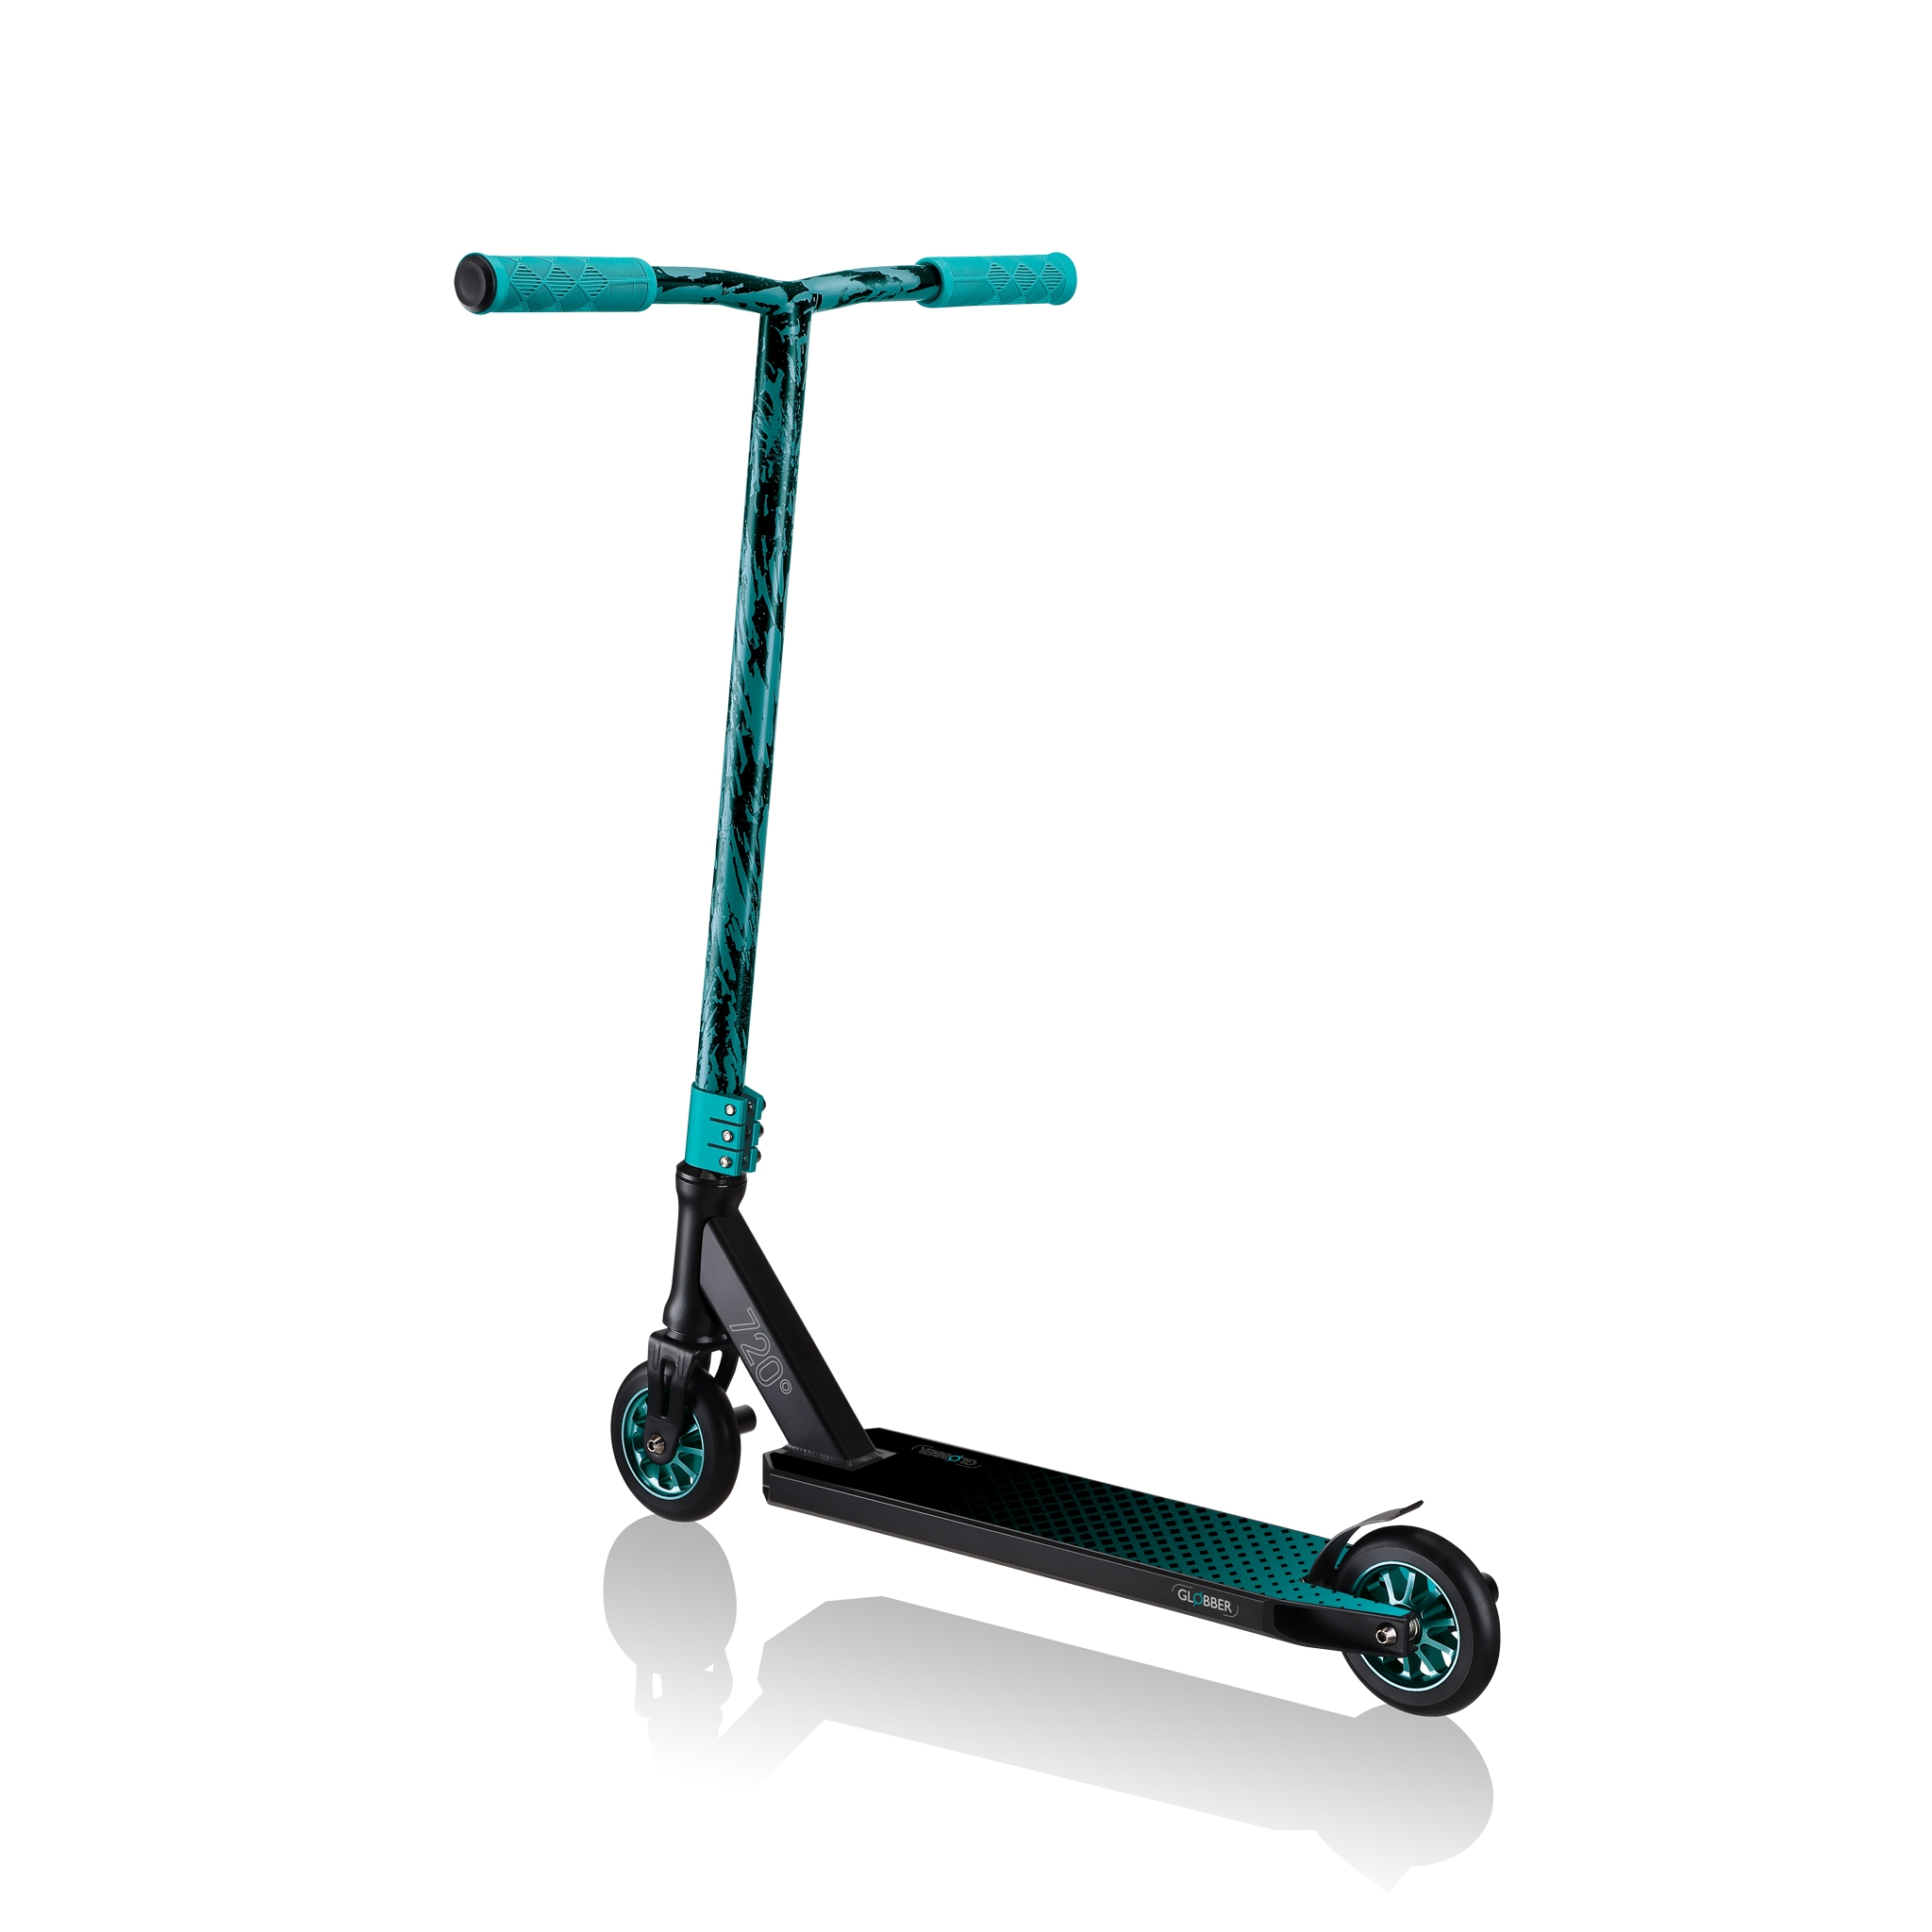 pro-trick-scooter-for-freestyling-Globber-GS720 3